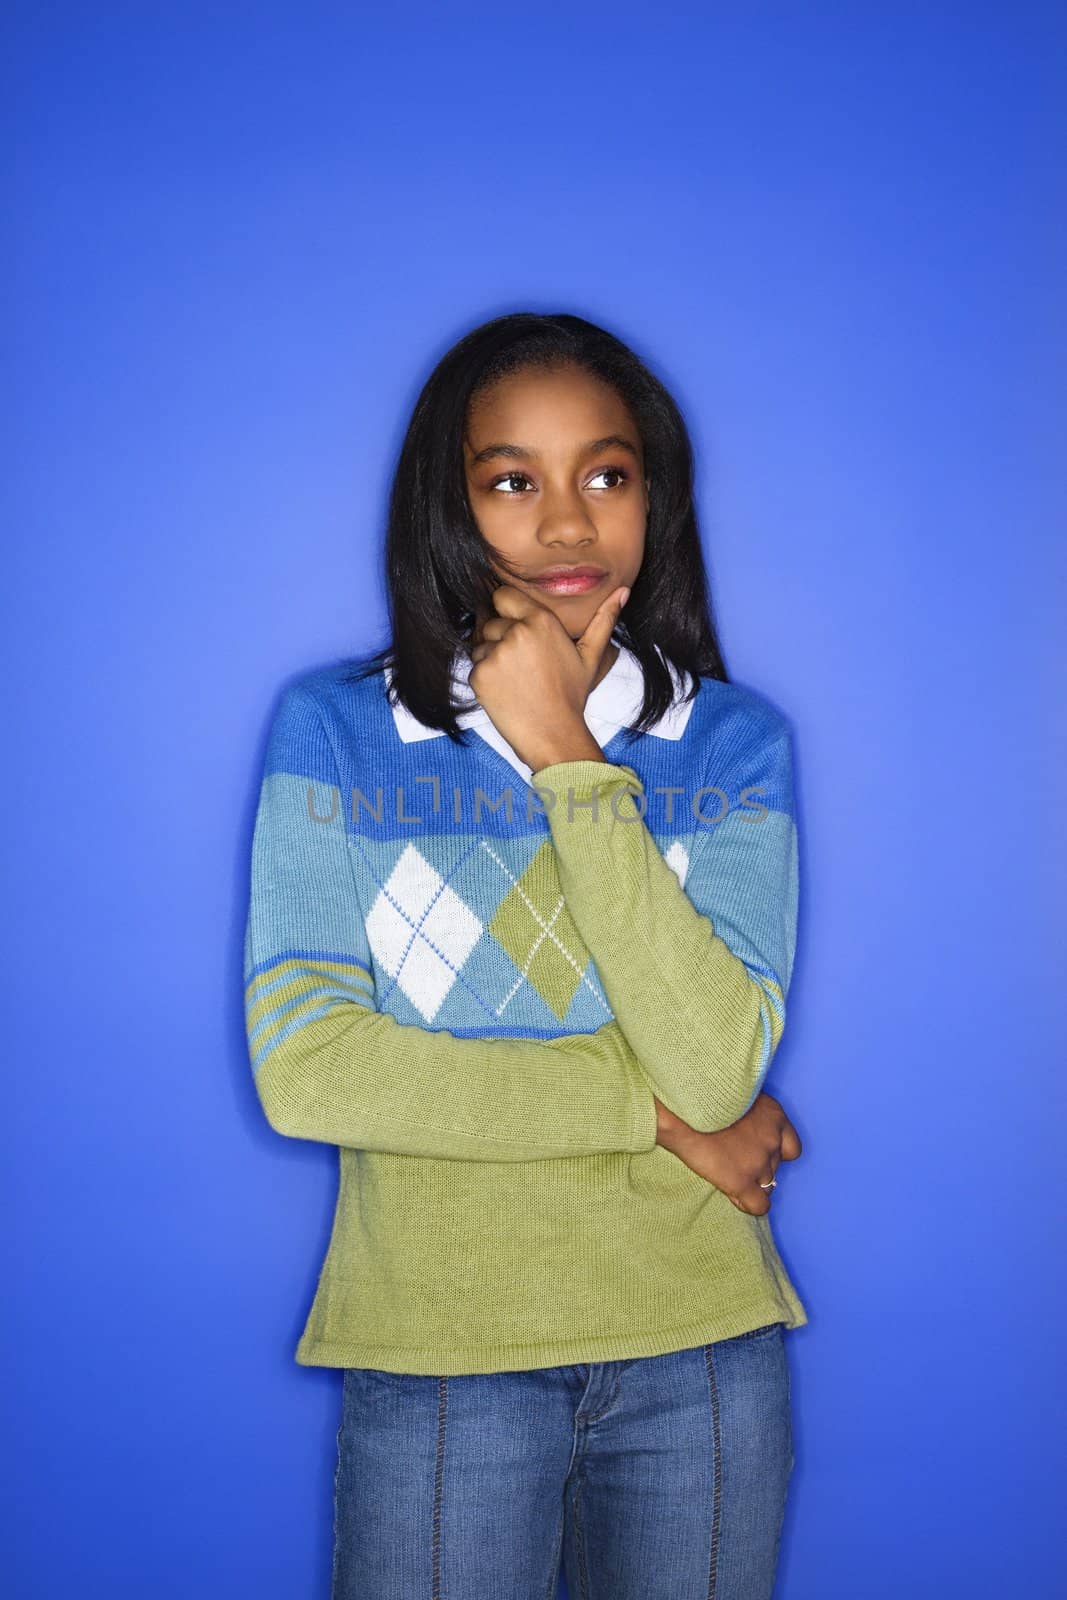 Portrait of African-American girl with hand on chin standing in front of blue background.